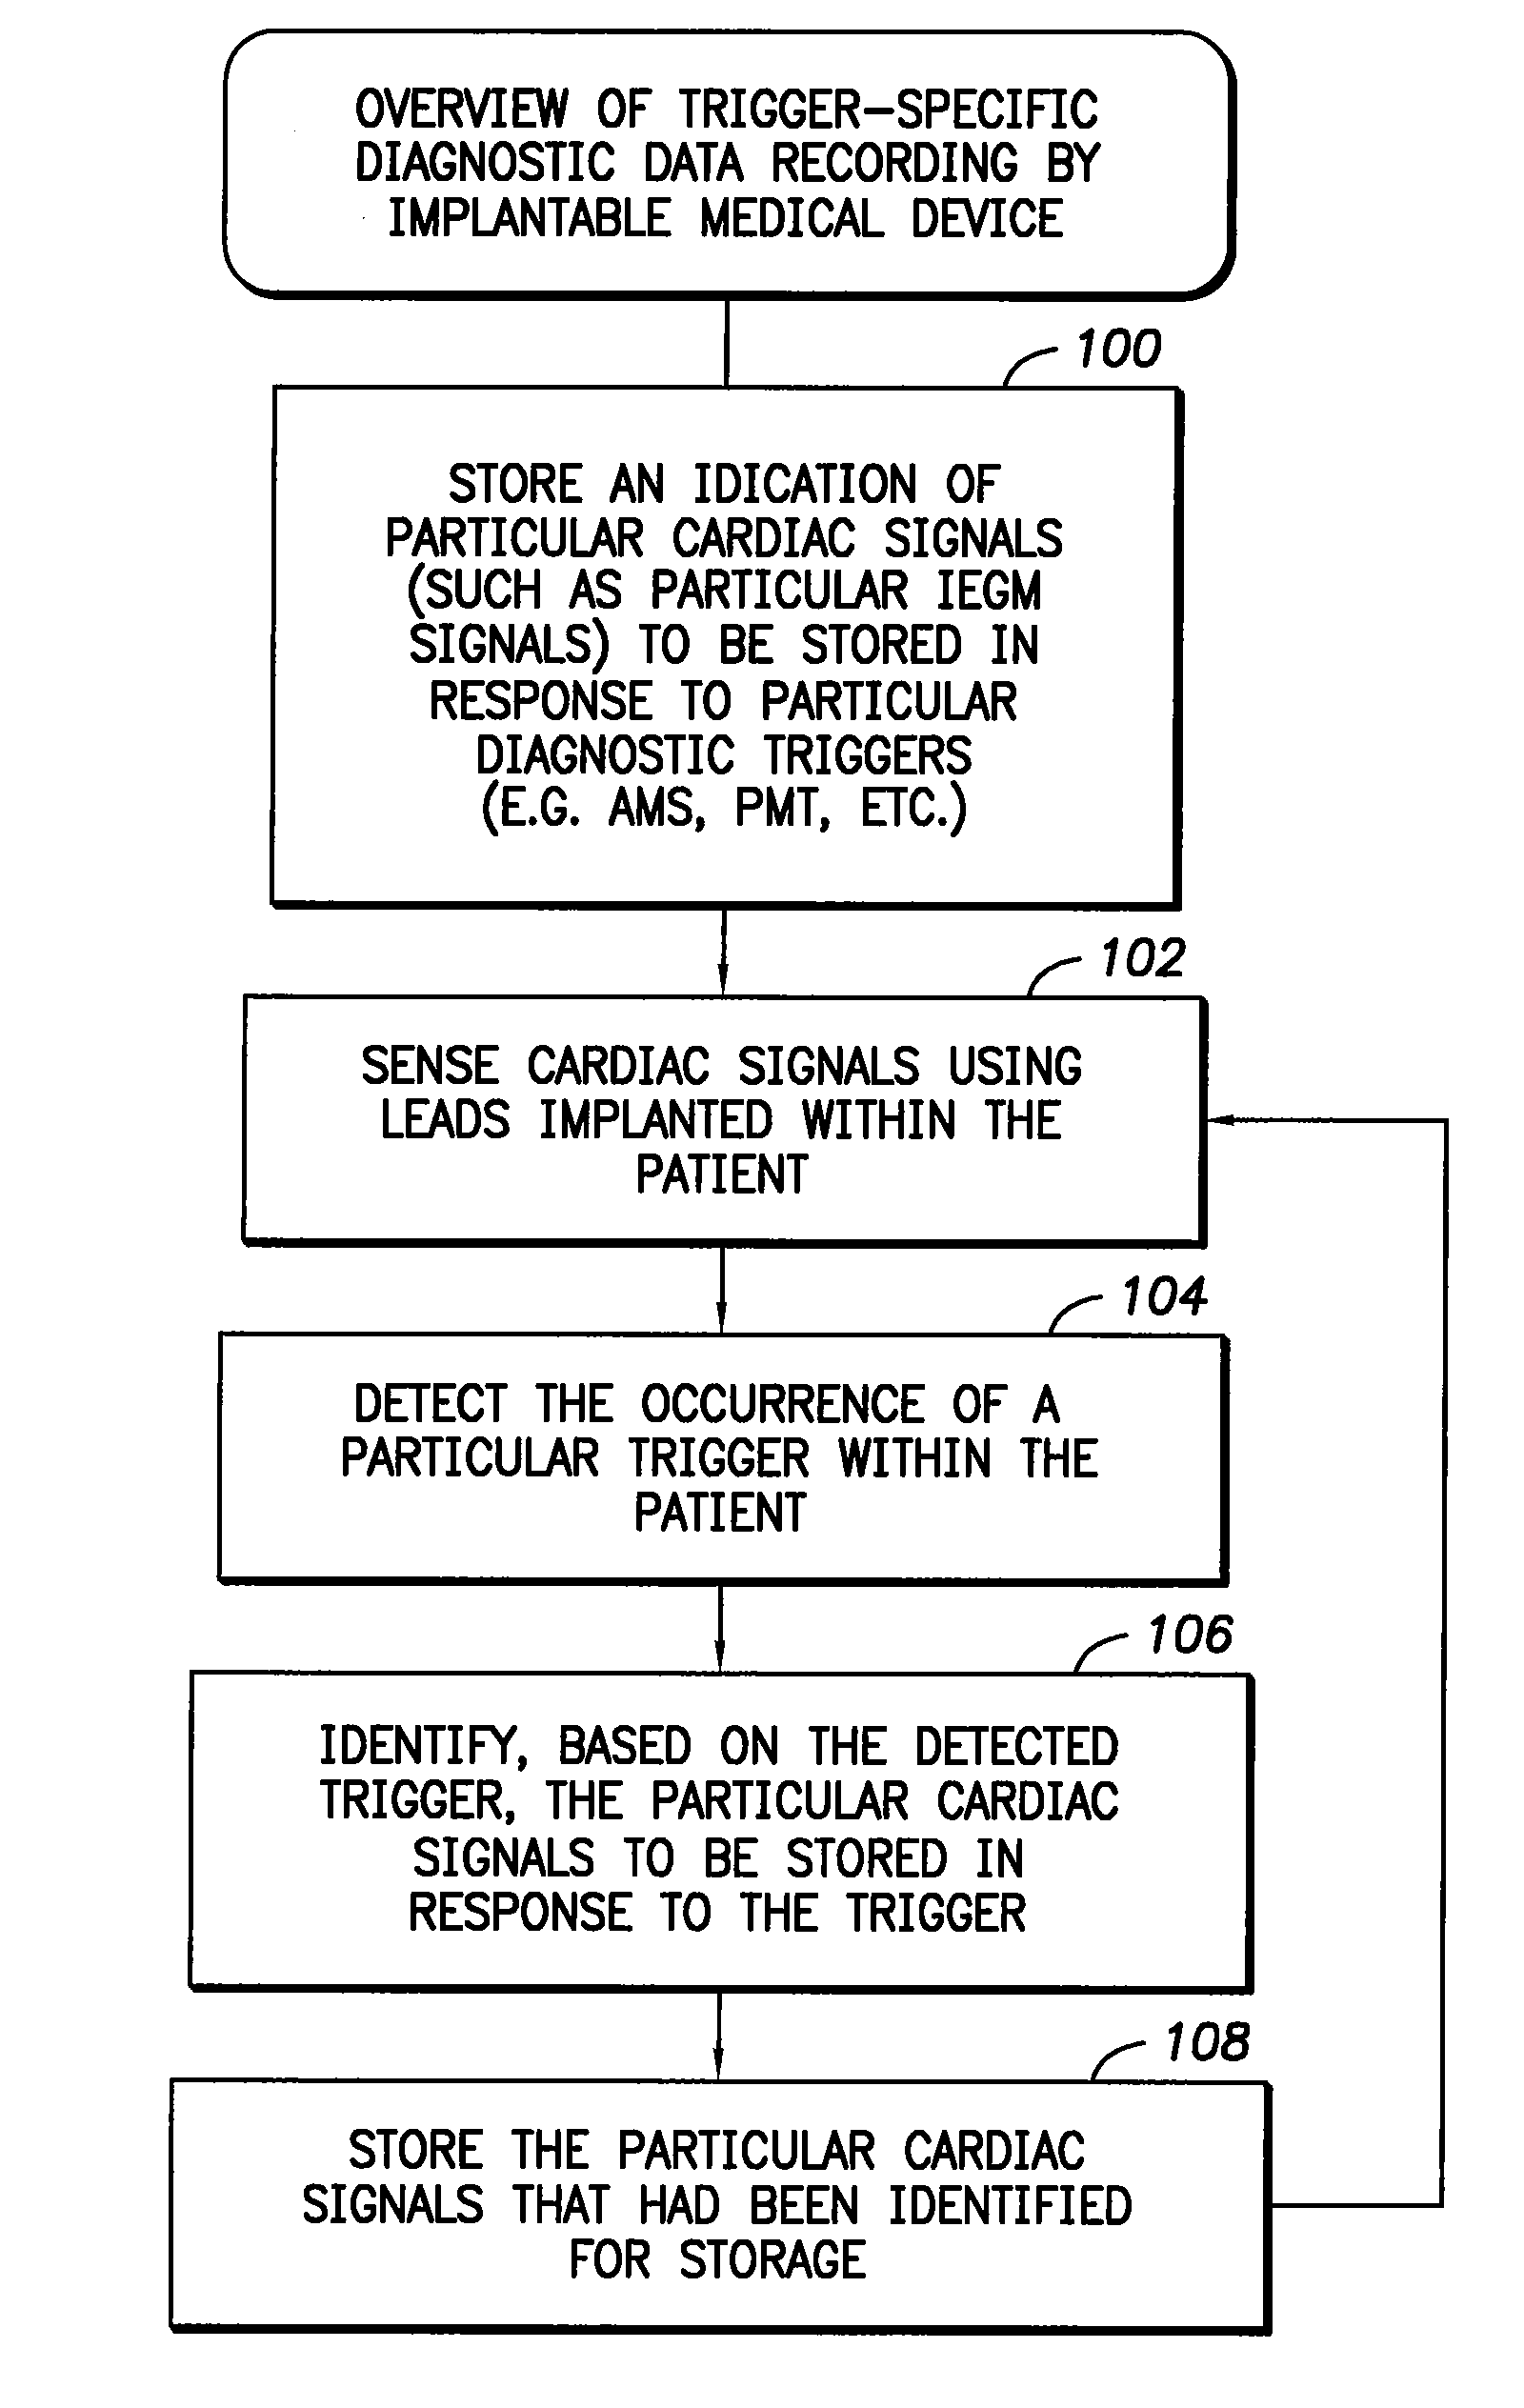 System and method for trigger-specific recording of cardiac signals using an implantable medical device